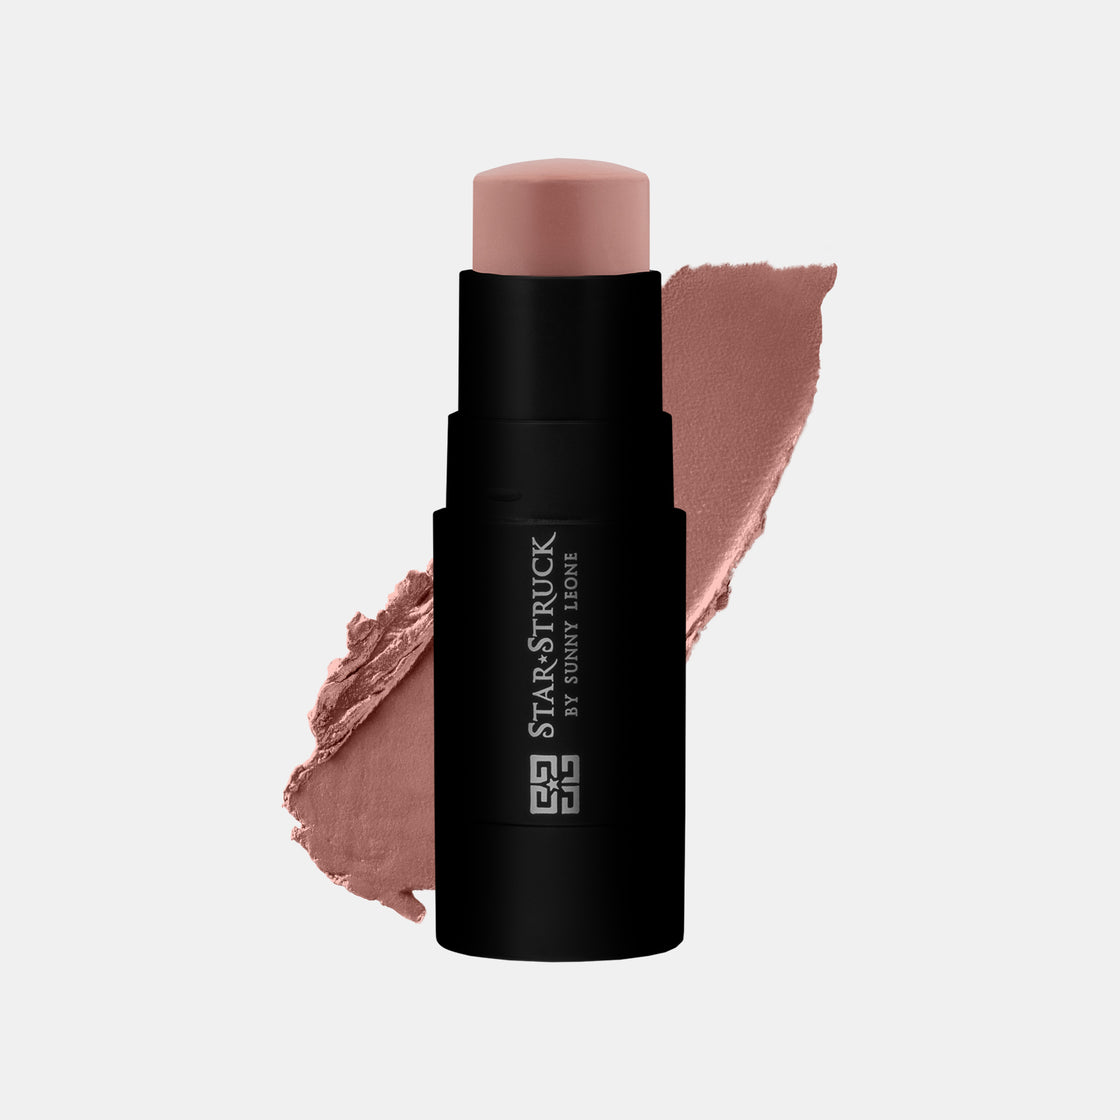 Ginger Love - Blush Stick, Water-resistant, Nude Pink | 7gms